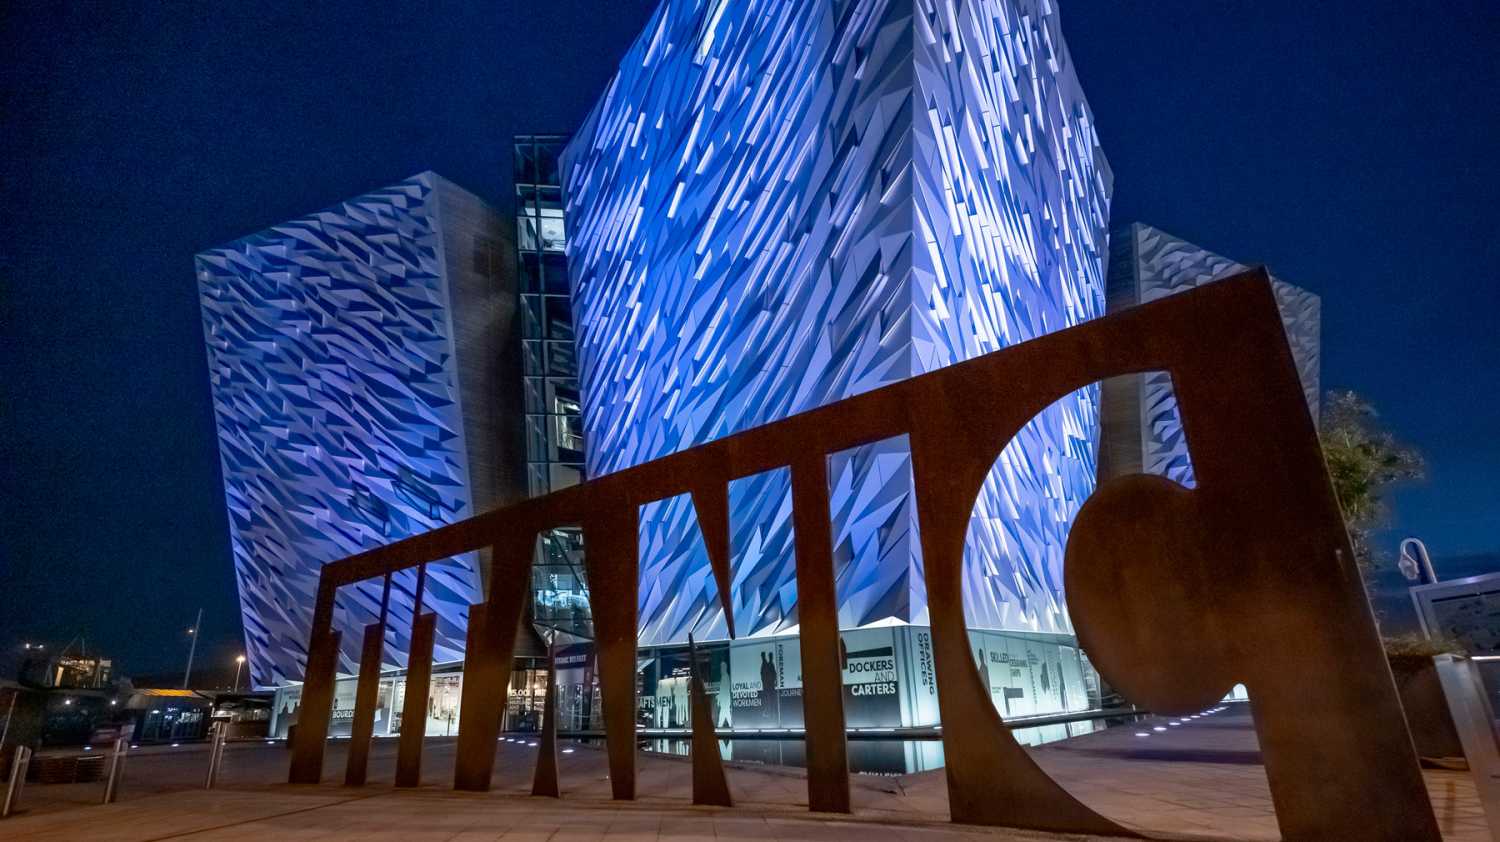 Titanic Experience is one of the most visited tourist destinations in Northern Ireland